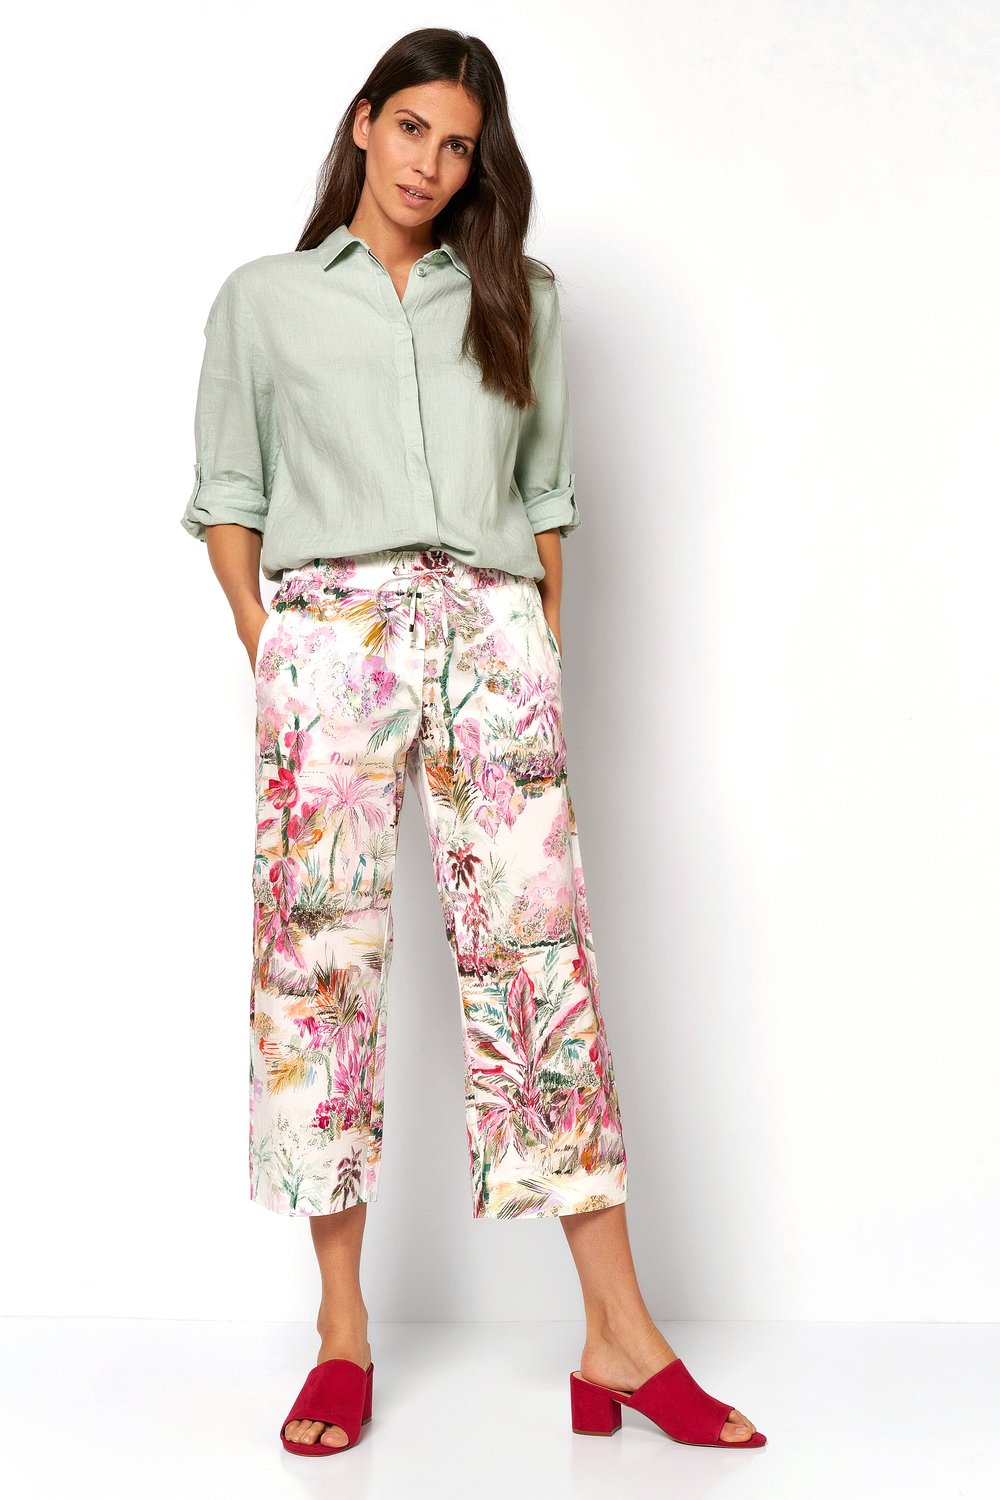 Leger 3/4 trousers with palm trees | Style »Pia« muticolour pink